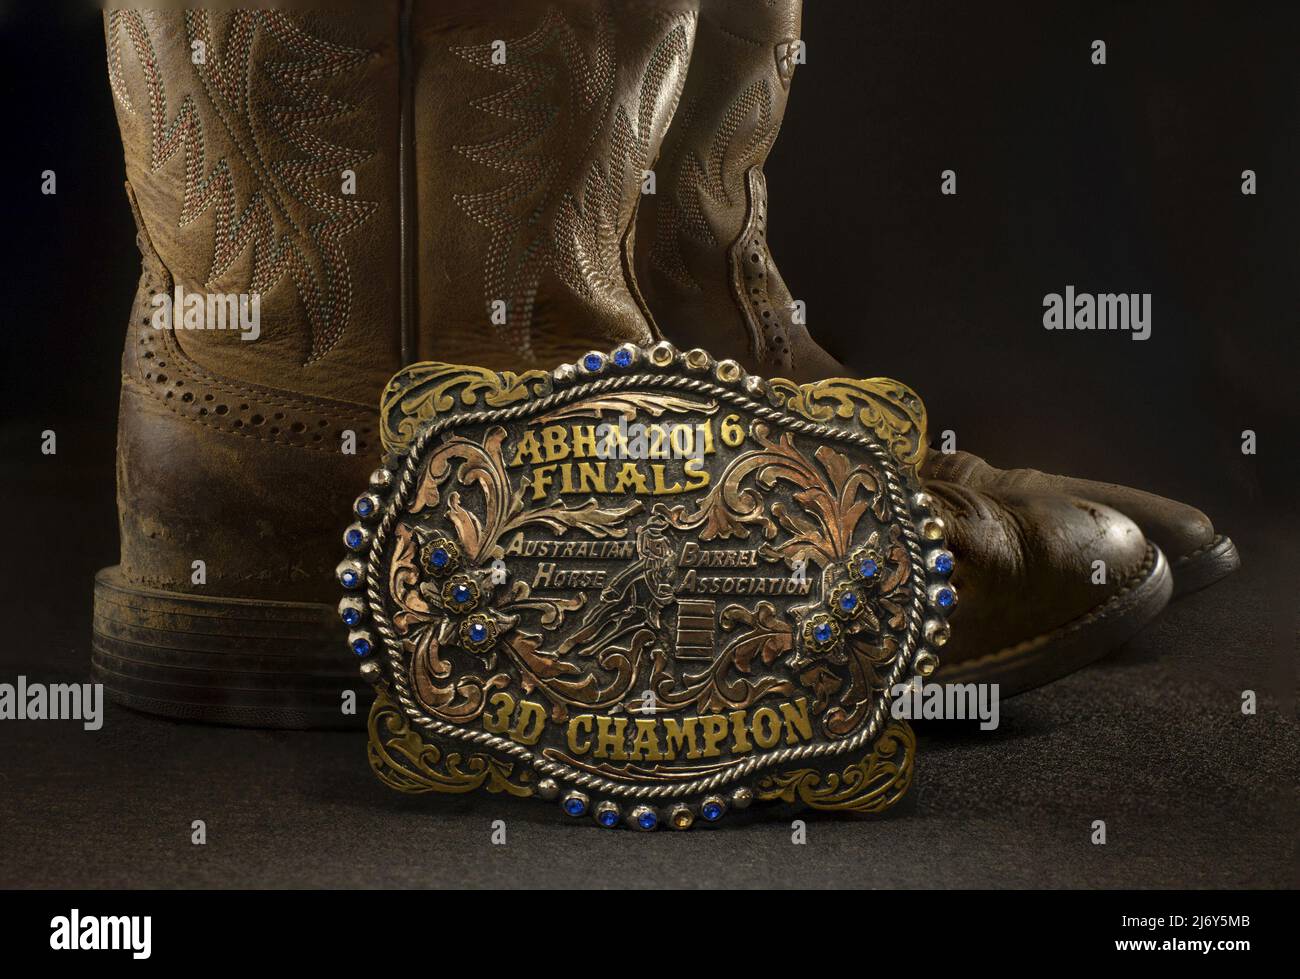 Riding boots and champion's buckle awarded the young winner of a national barrel-racing championship on a horse called Turbo at the ABHA 2016 finals. Stock Photo